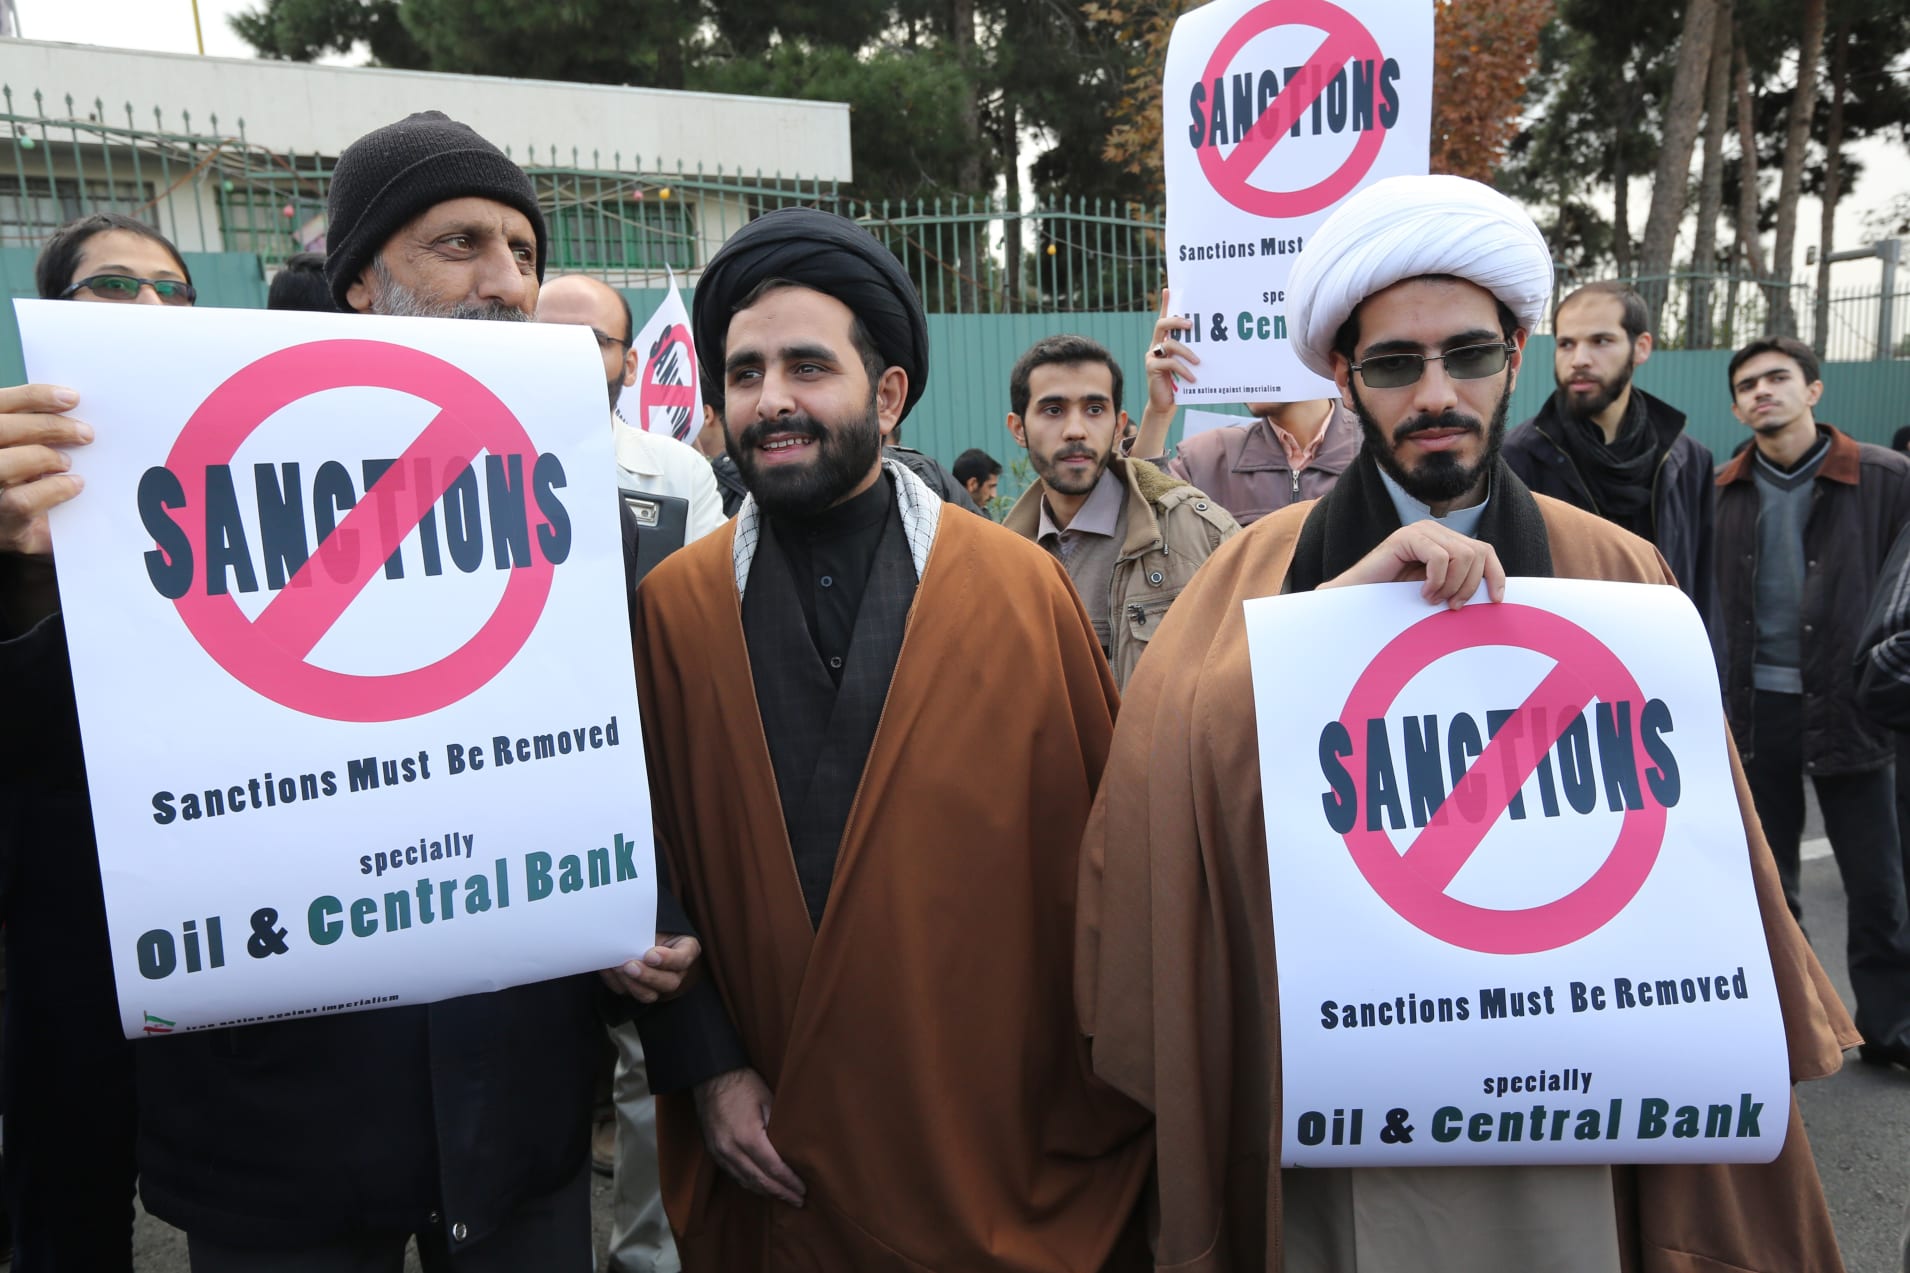 Iranian men hold placards reading 'Sanctions must be removed' in the capital Tehran on November 23, 2014